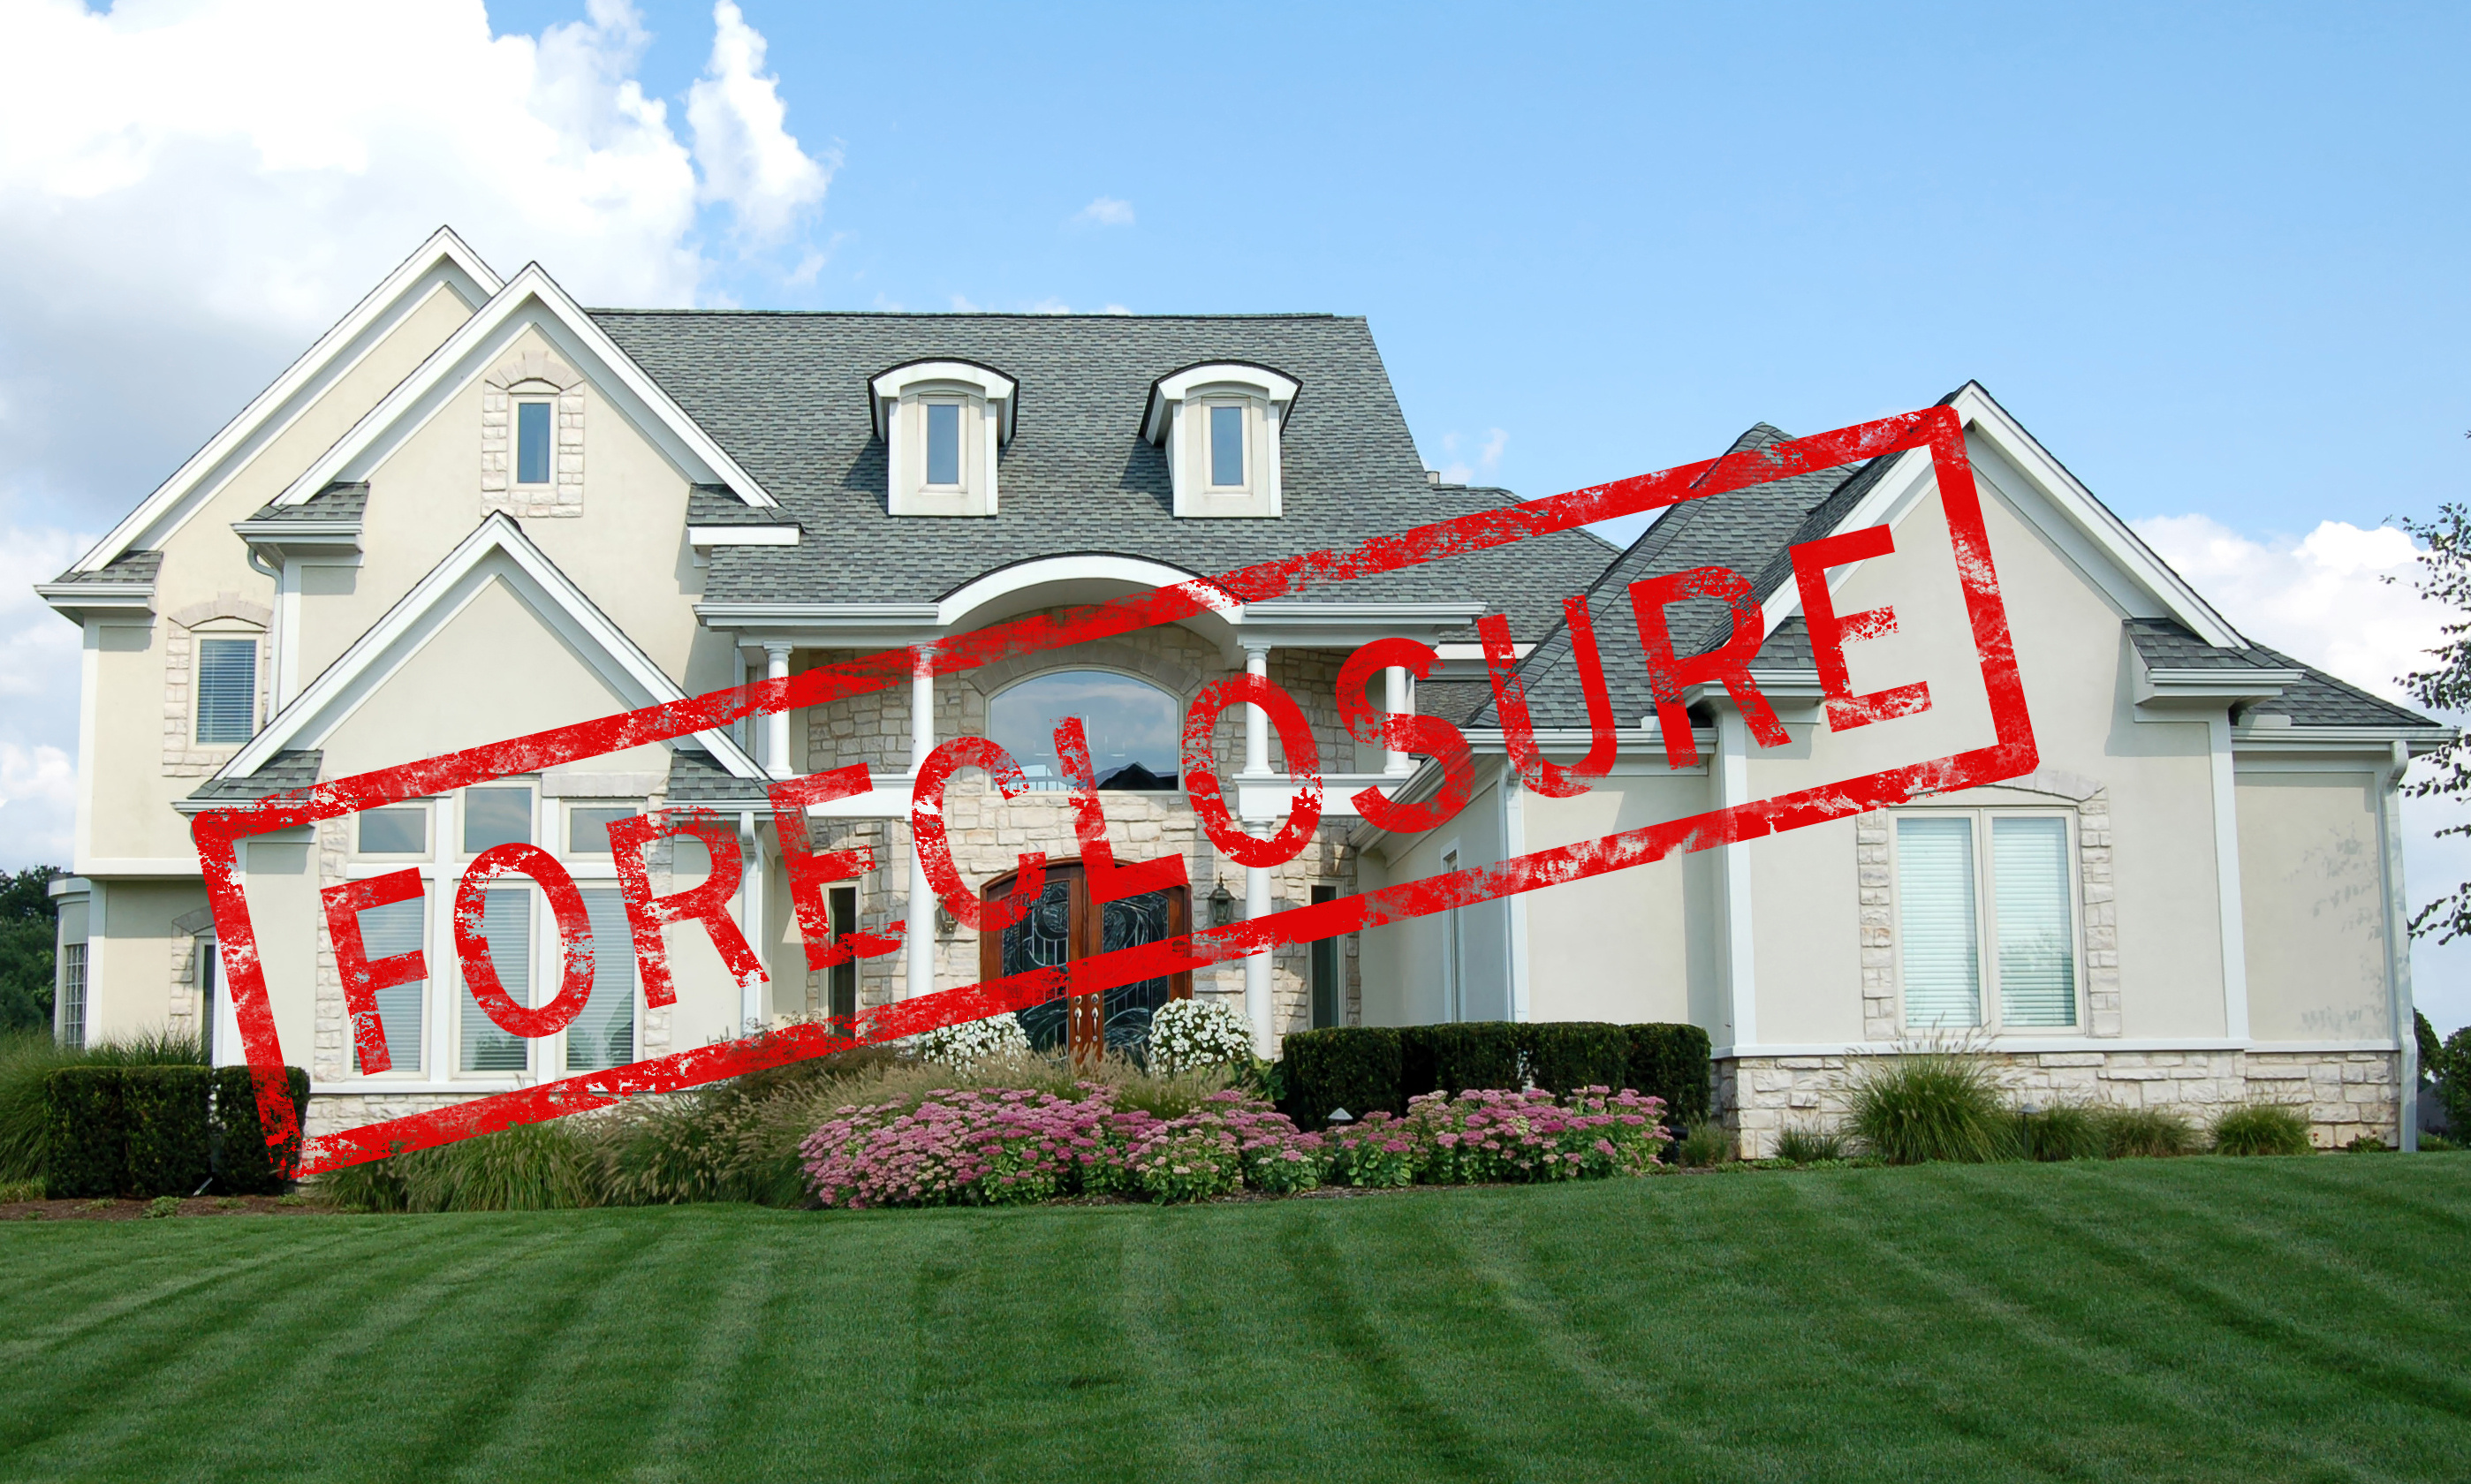 Call South Shore Realty Advisors, Inc when you need appraisals regarding Plymouth foreclosures